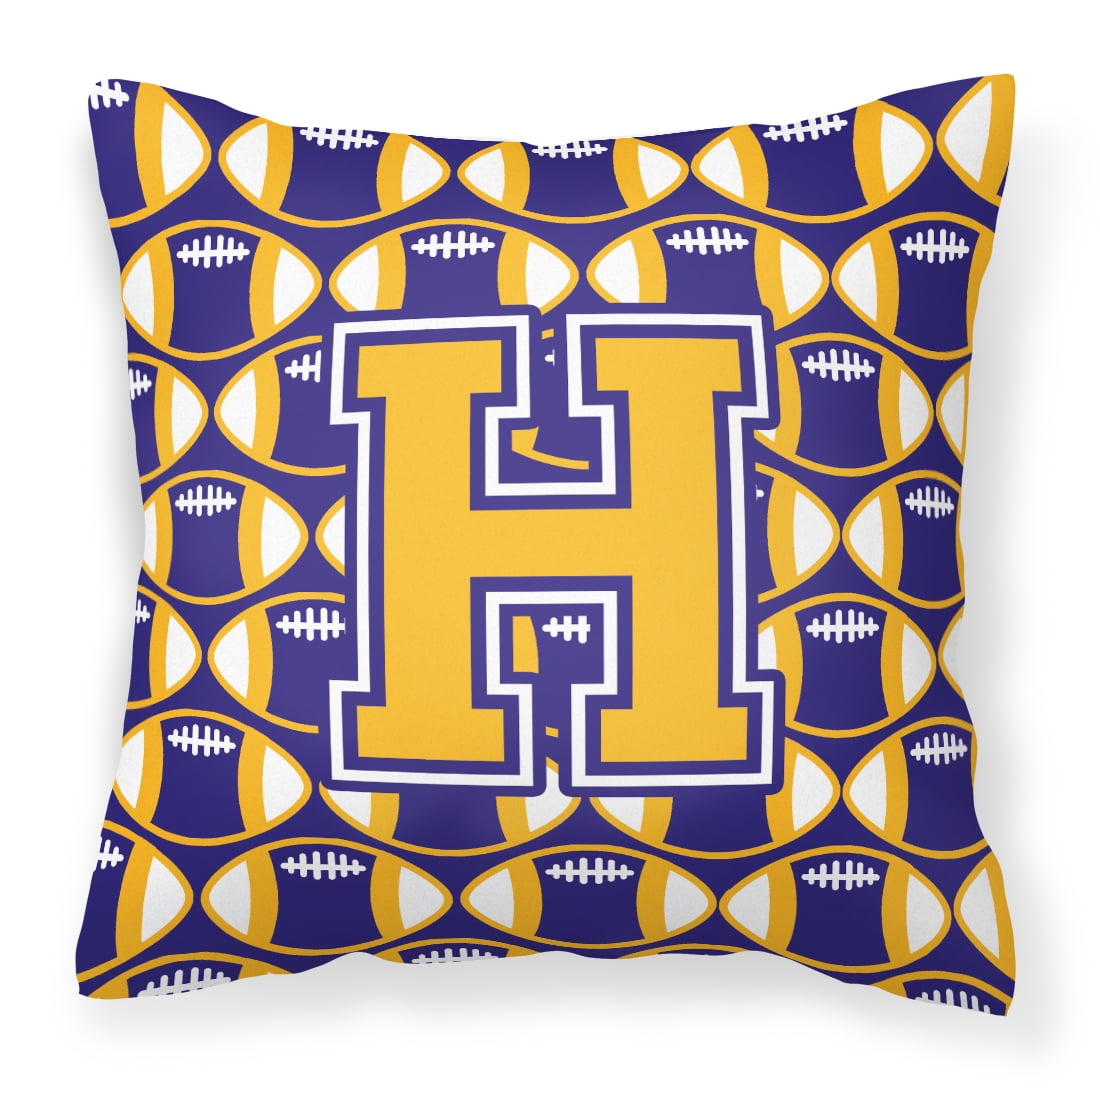 Letter H Football Purple and Gold Fabric Decorative Pillow - Walmart.com